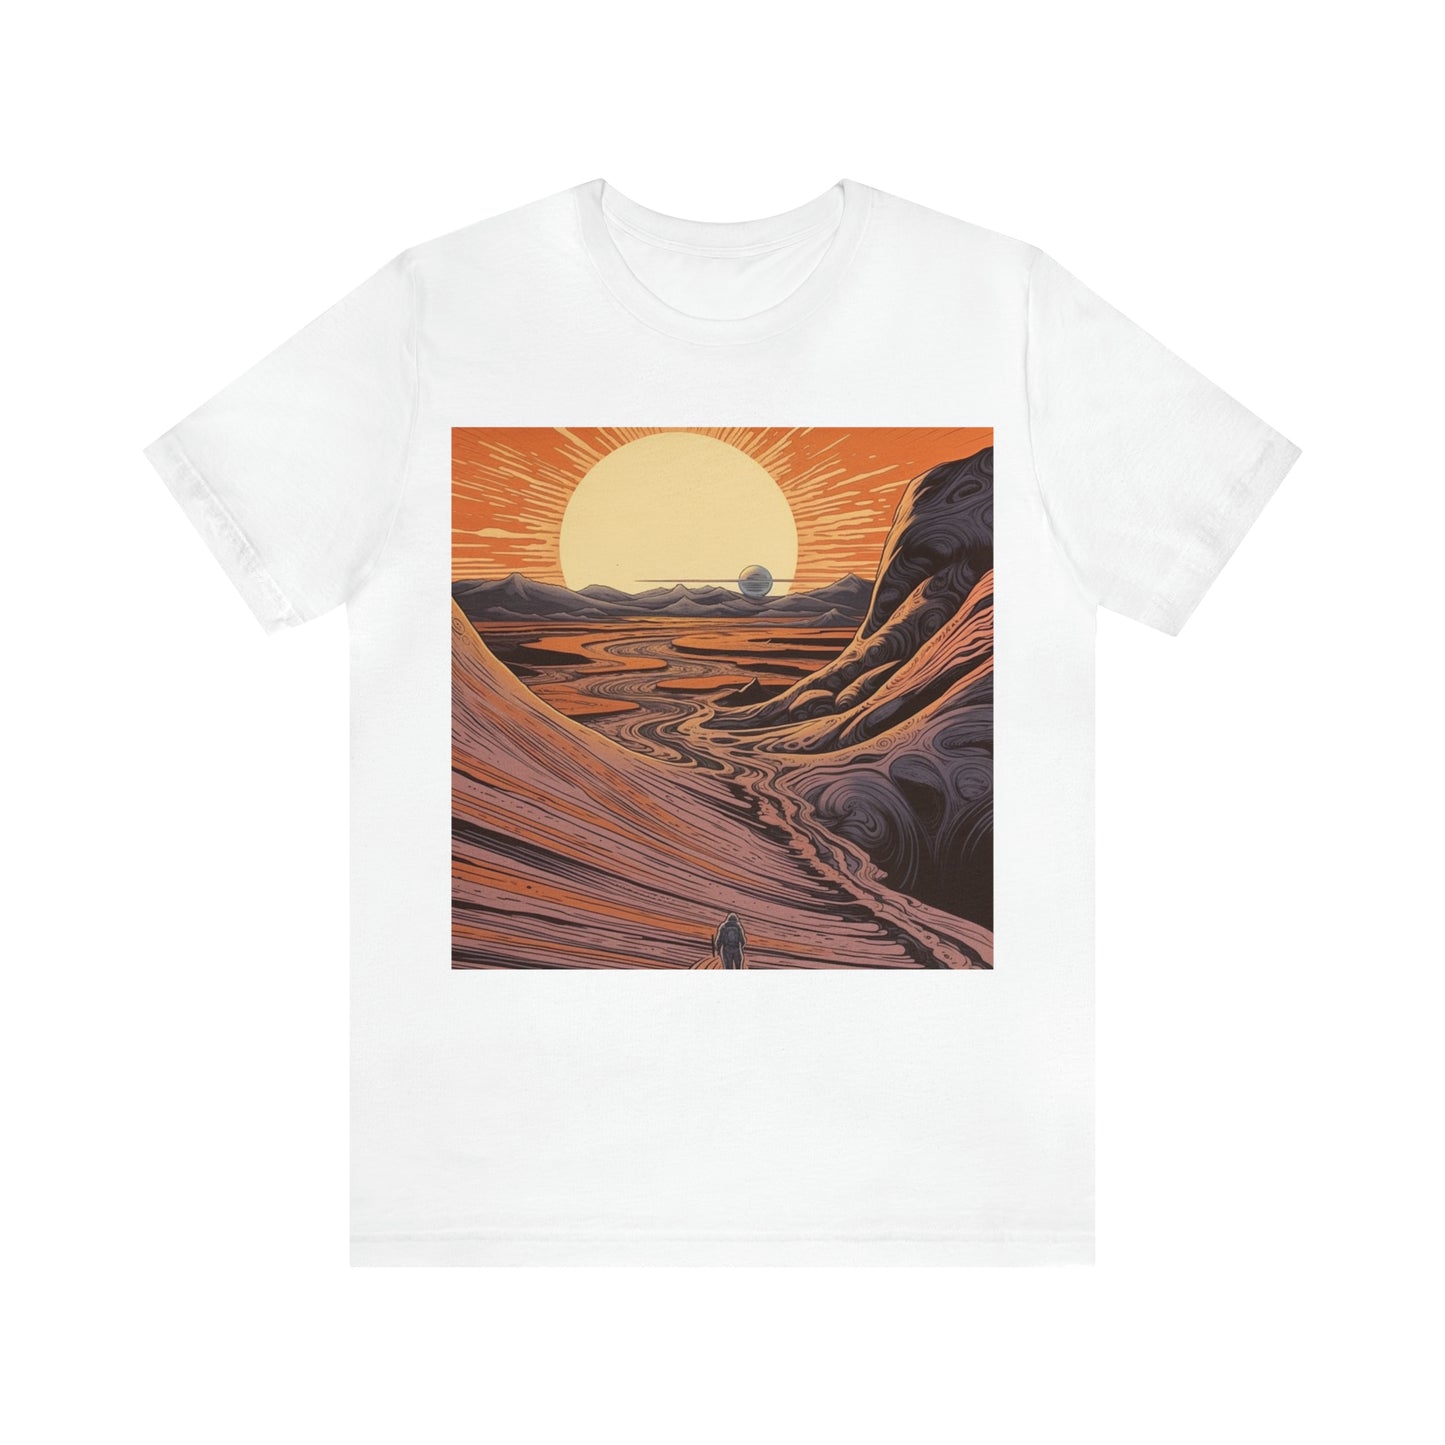 white-quest-thread-tee-shirt-with-large-sunrise-over-dunes-on-center-of-shirt